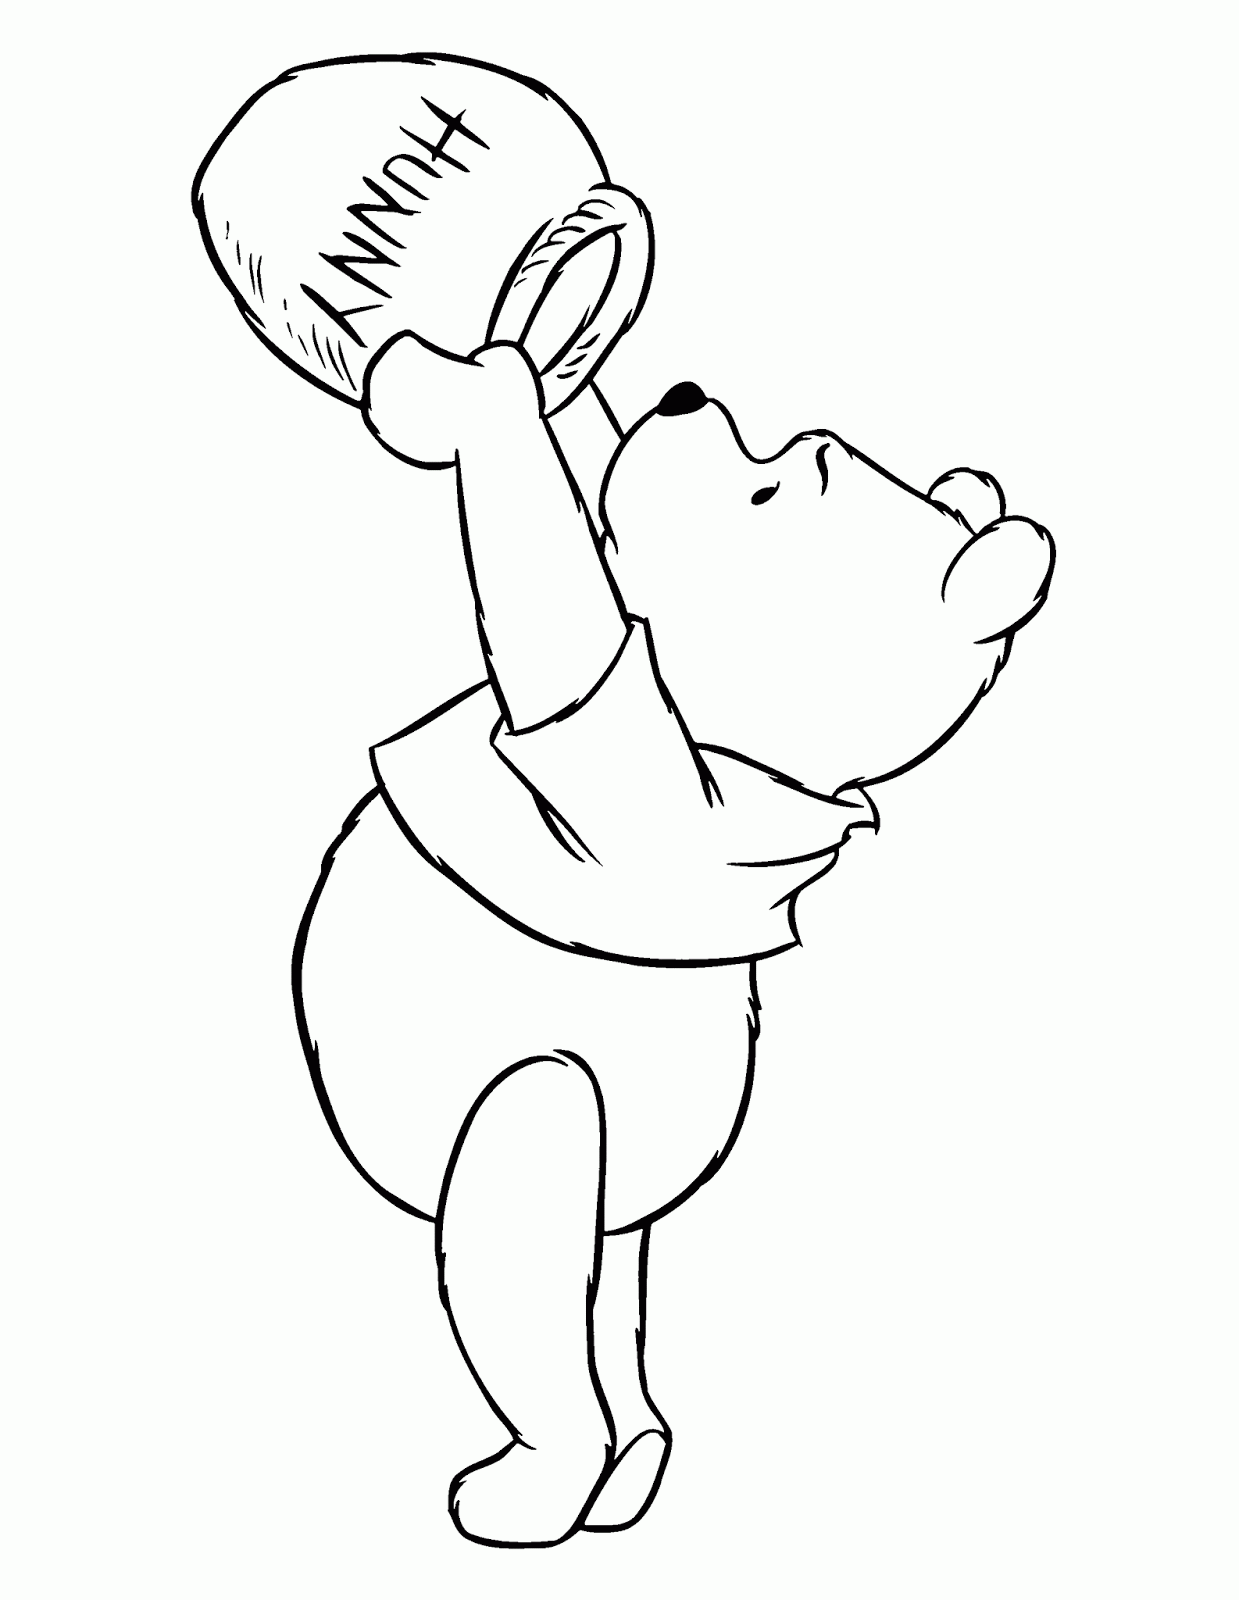 Download Coloring Pages: Winnie the Pooh and Friends Free Printable ...